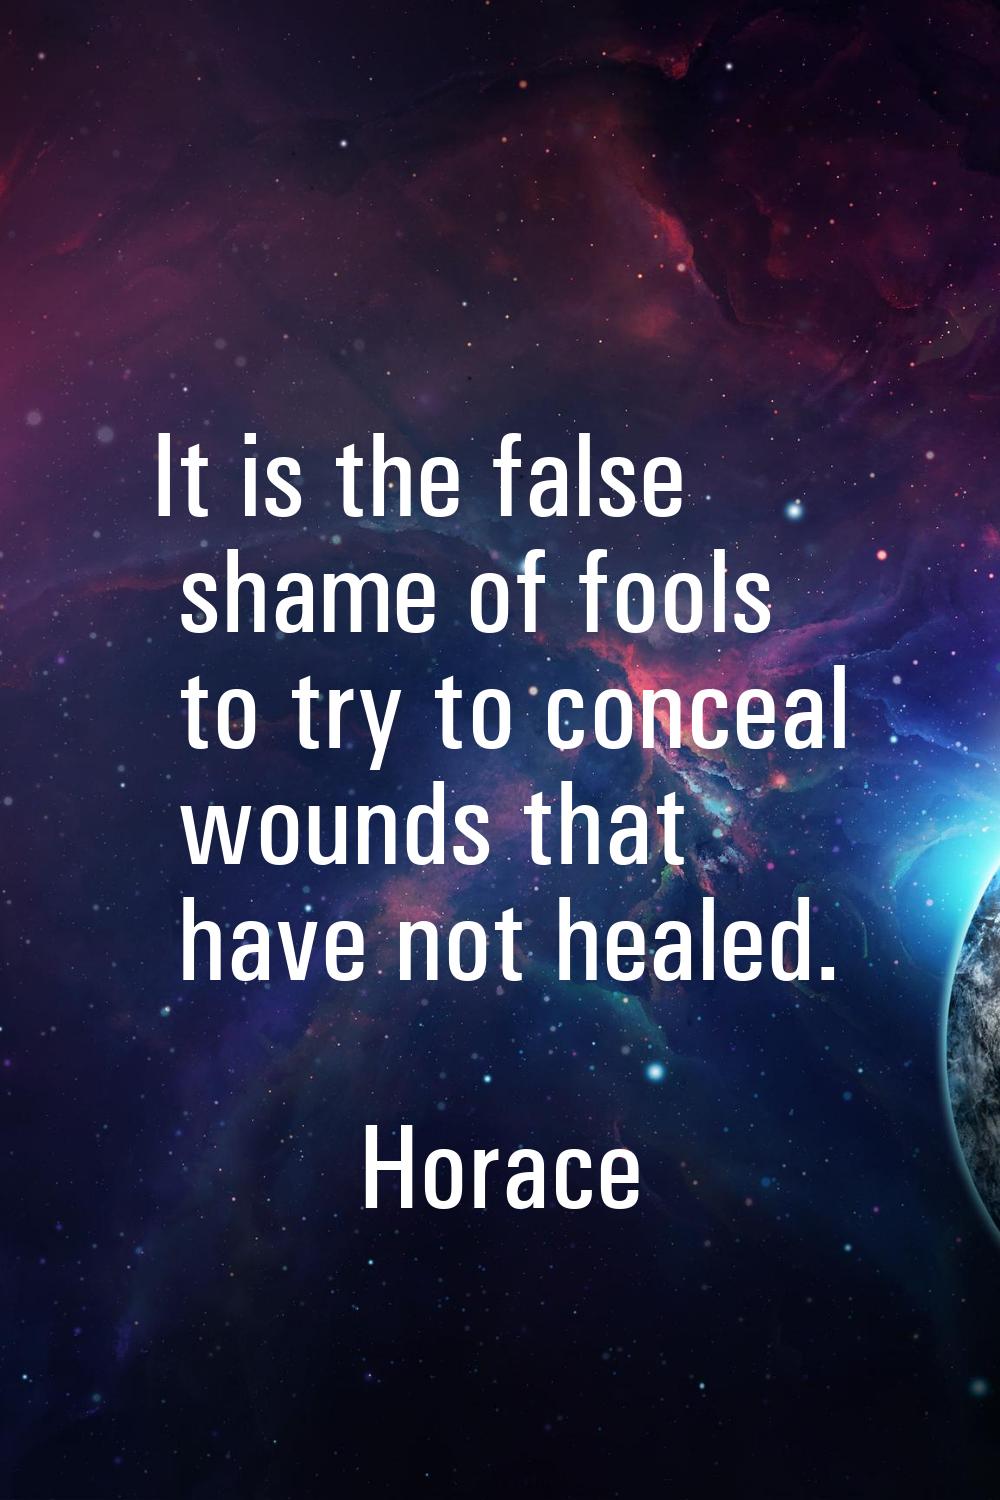 It is the false shame of fools to try to conceal wounds that have not healed.